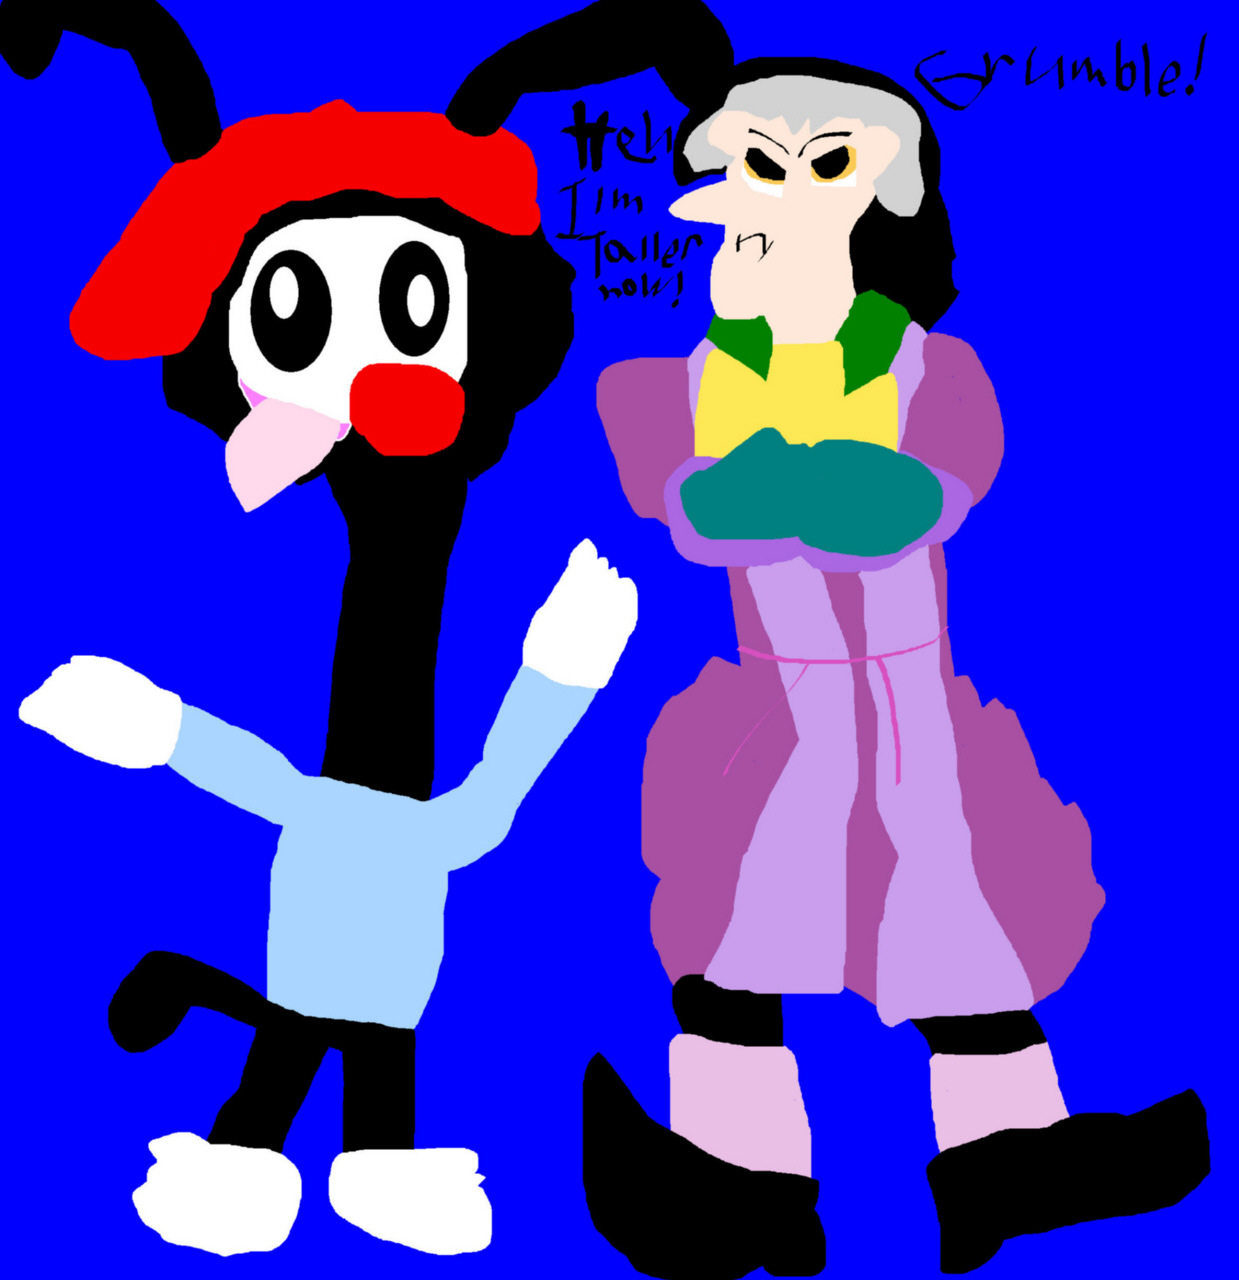 Wakko Stretches The Truth A Bit With Cedric MS Paint by Falconlobo